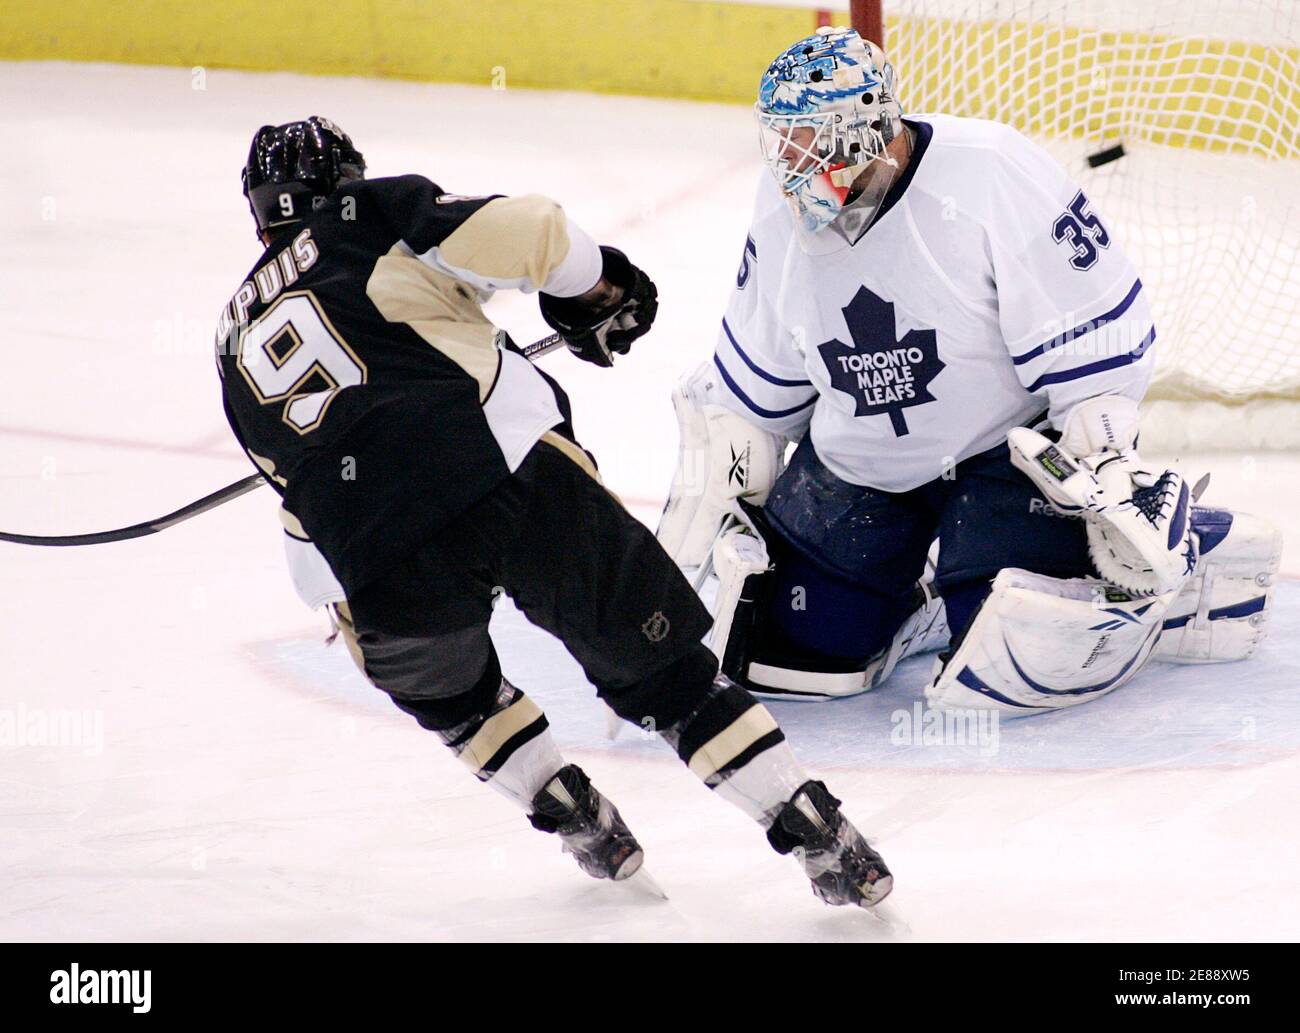 Pittsburgh Penguins Pascal Dupuis (9) scores against Toronto Maple Leafs  goalie Jean-Sebastien Giguere in a shootout at their NHL hockey game in  Pittsburgh, Pennsylvania, March 28, 2010. REUTERS/ Jason Cohn (UNITED  STATES -